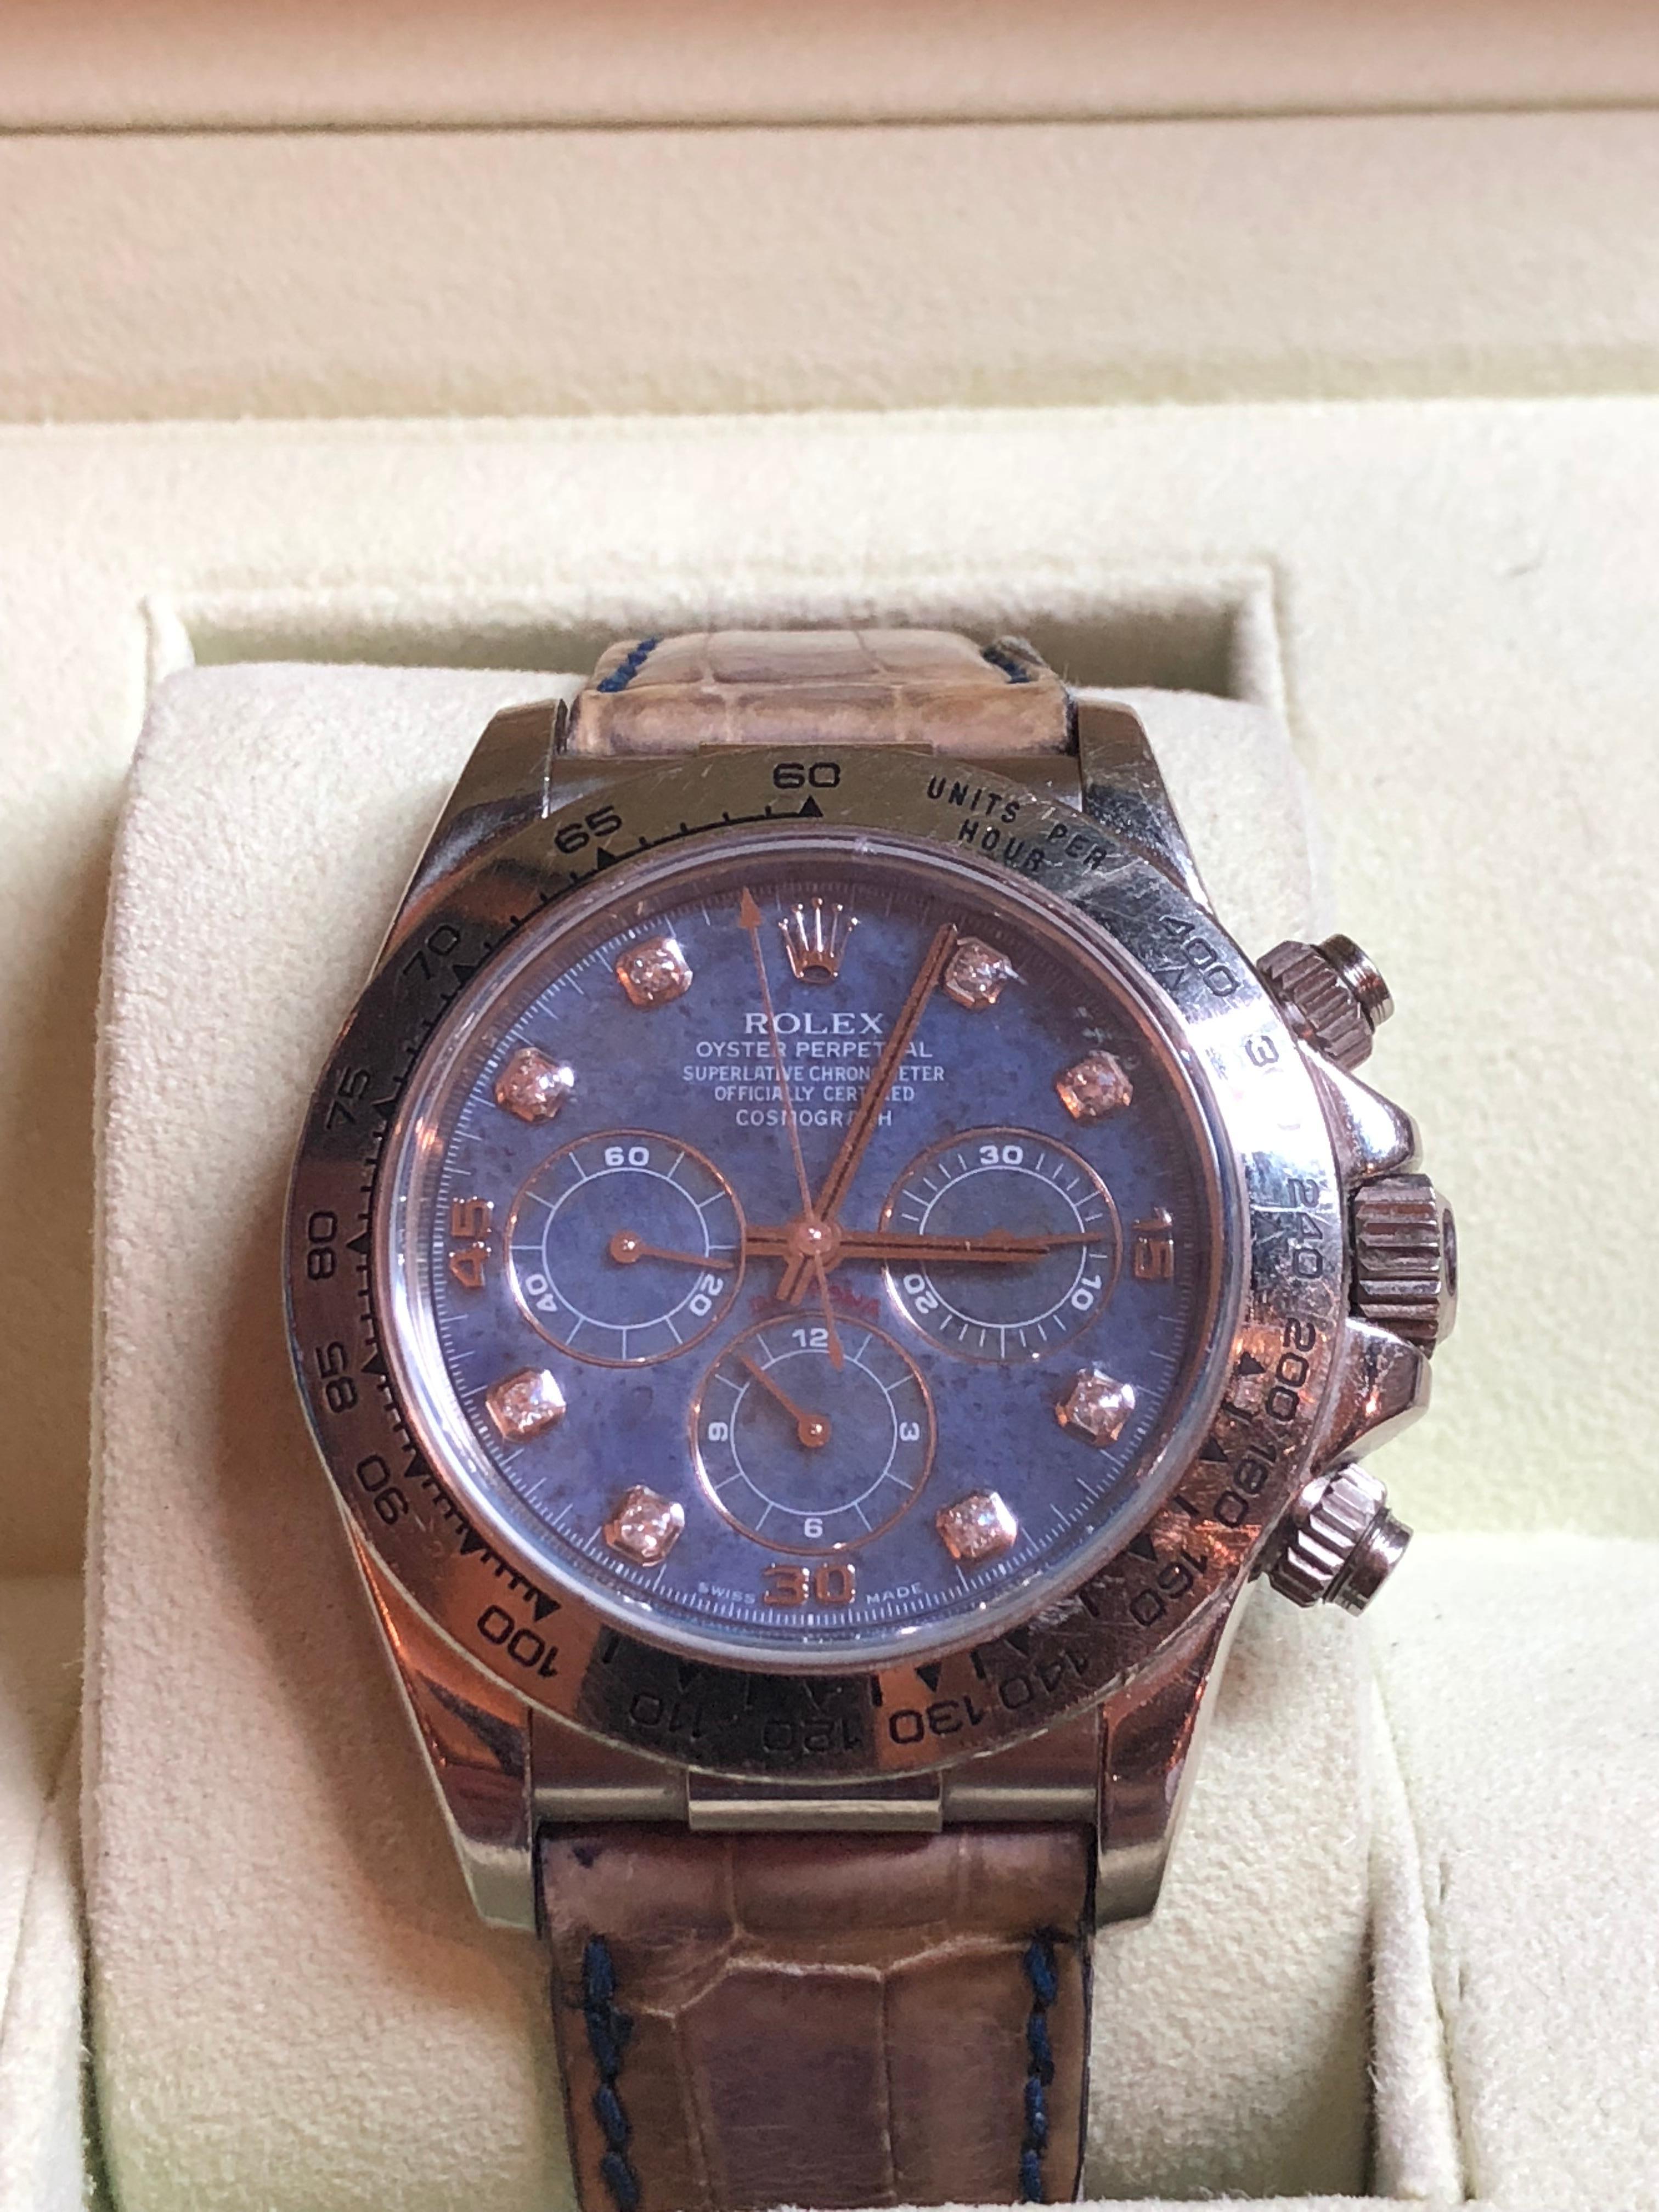 Rare Rolex Daytona 16519 18K Gold White Gold with Sodalite Dial and Zenith Movement
A serial number 1999/2000
Graet Condition
18K white Gold Case 40mm
Folding Clasp
Leather Band
Sapphire Crystal
